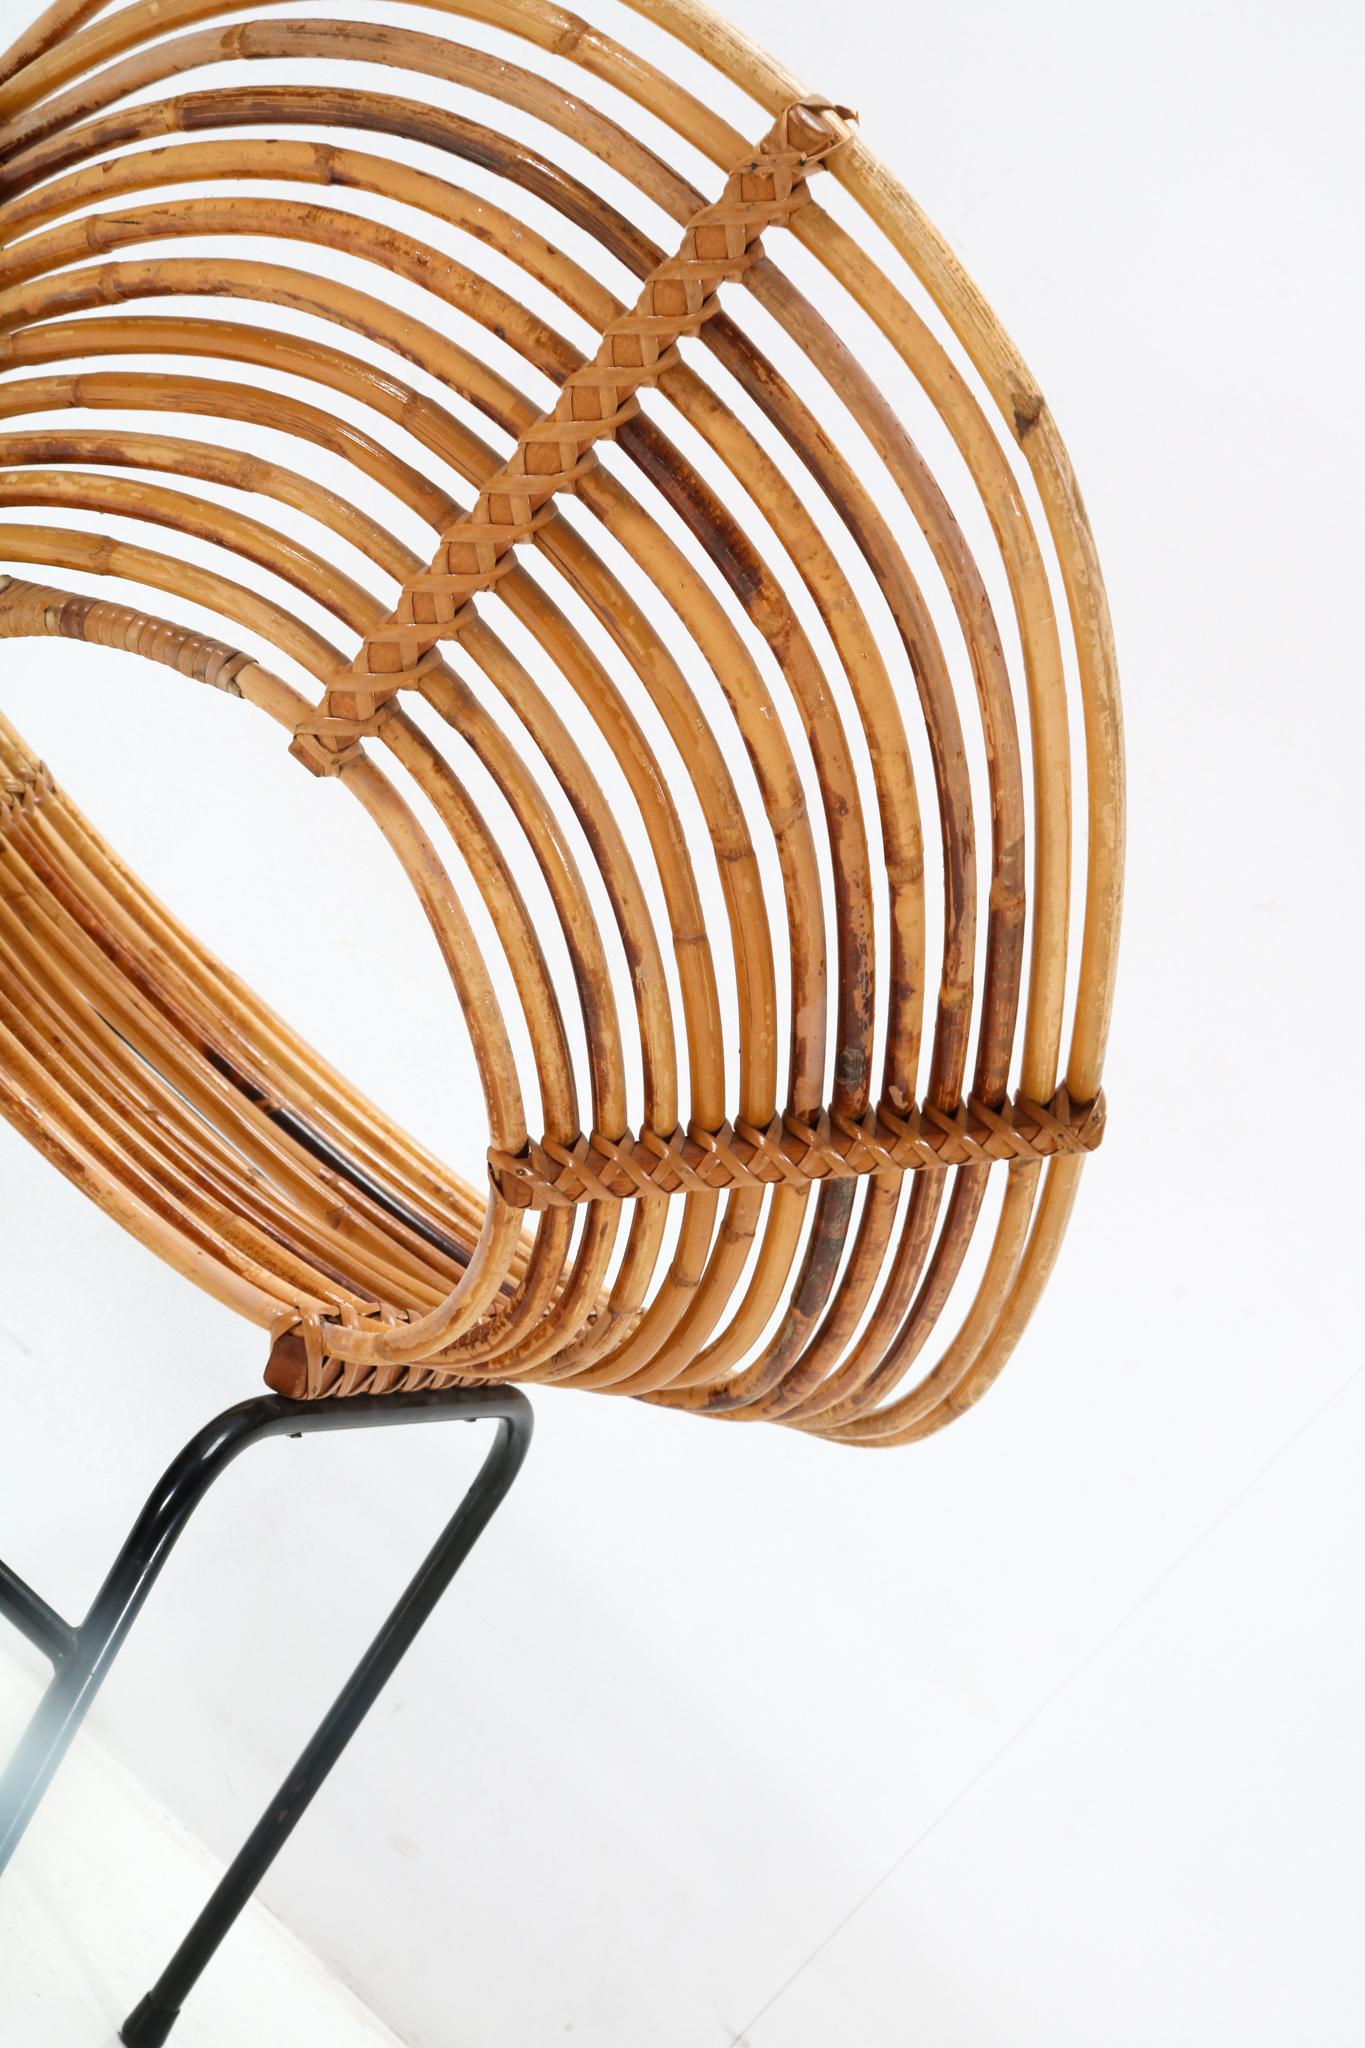 Rattan Mid-Century Modern Lounge Chair by Dirk van Sliedregt for Rohe, 1950s For Sale 3